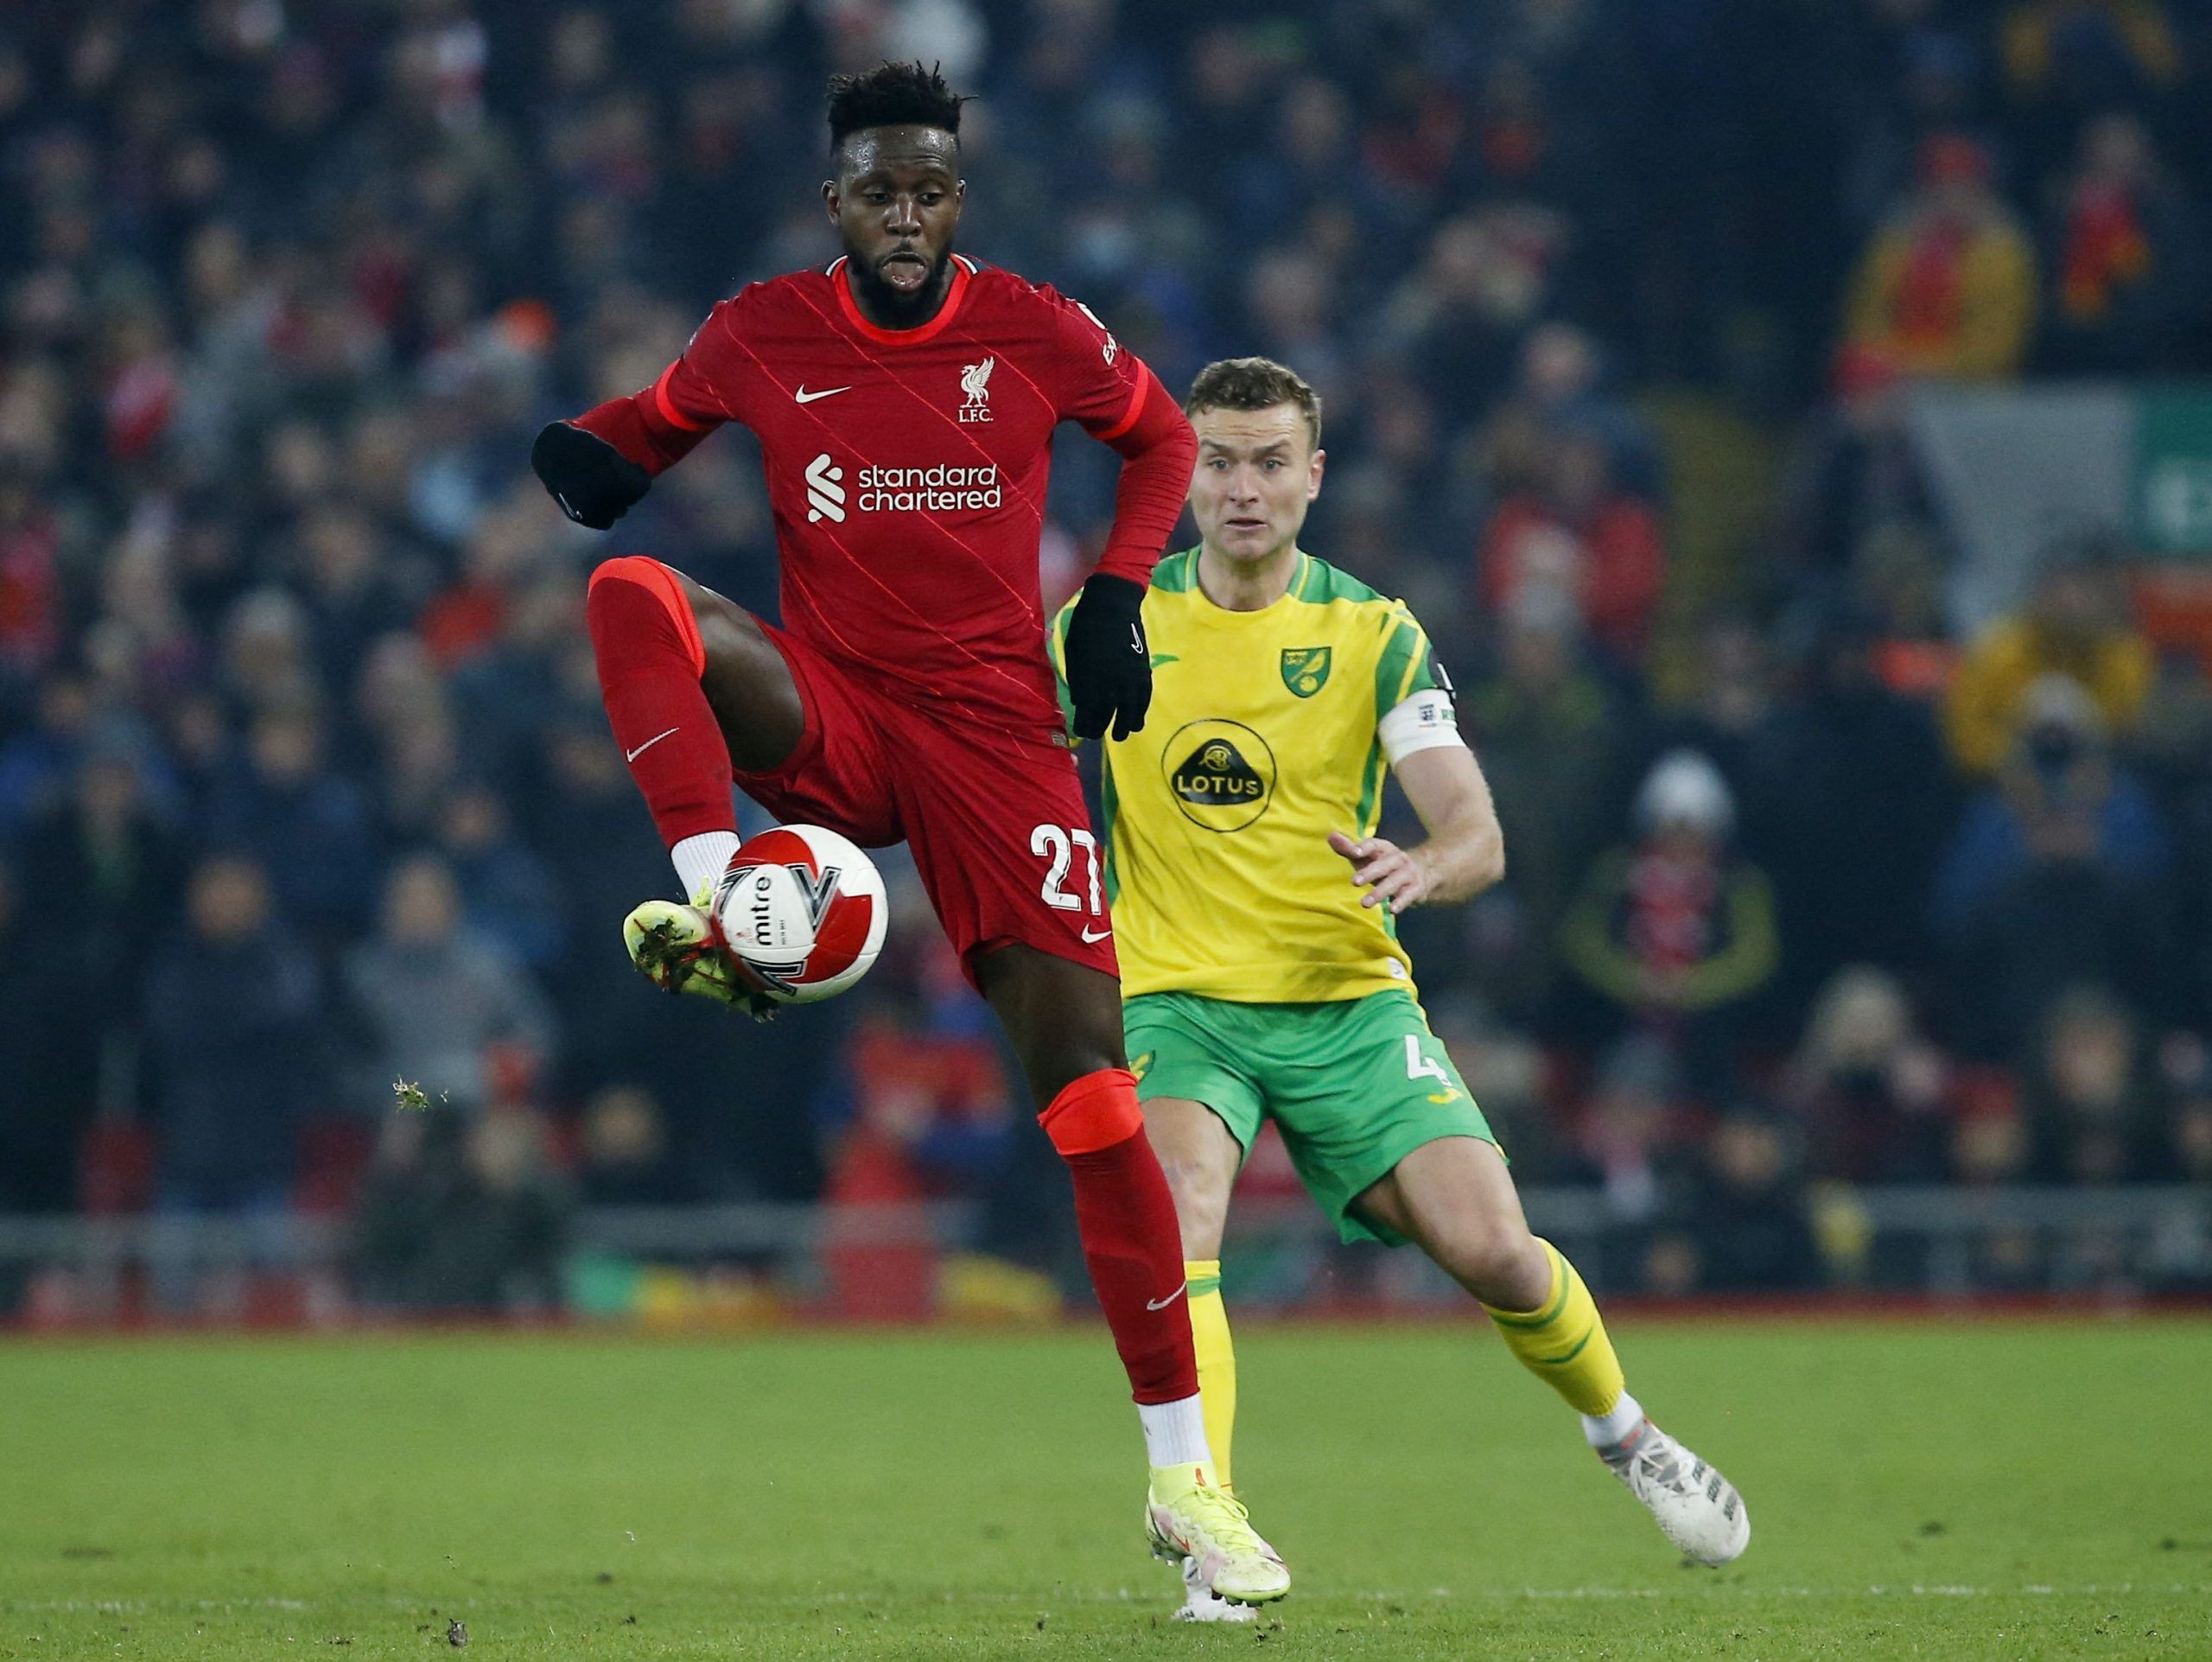 Soccer Football - FA Cup Fifth Round - Liverpool v Norwich City - Anfield, Liverpool, Britain - March 2, 2022 Liverpool's Divock Origi in action with Norwich City's Ben Gibson REUTERS/Craig Brough